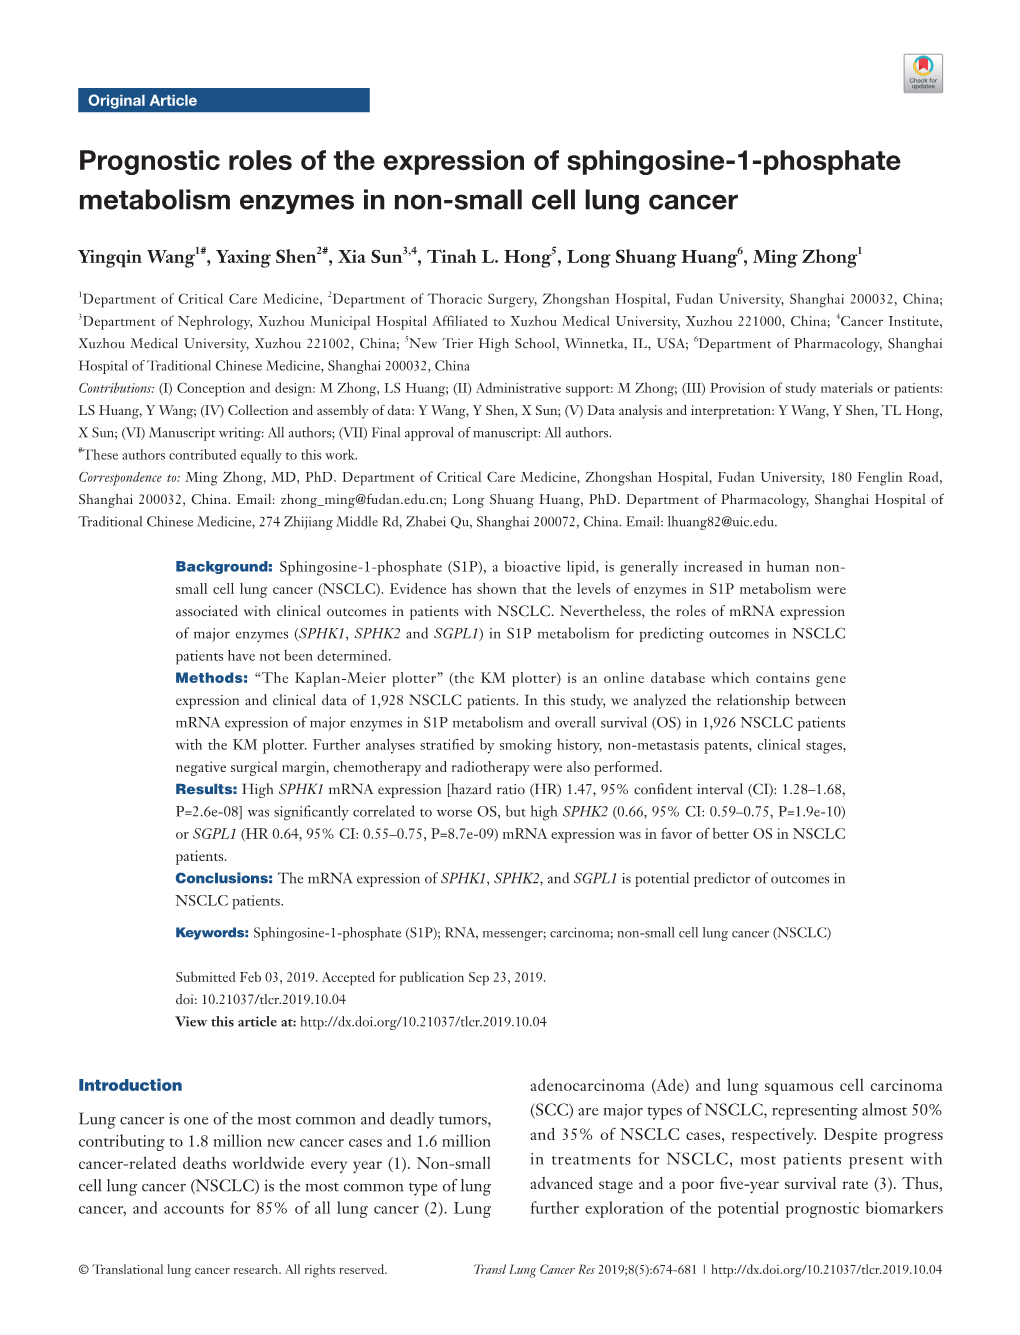 Prognostic Roles of the Expression of Sphingosine-1-Phosphate Metabolism Enzymes in Non-Small Cell Lung Cancer